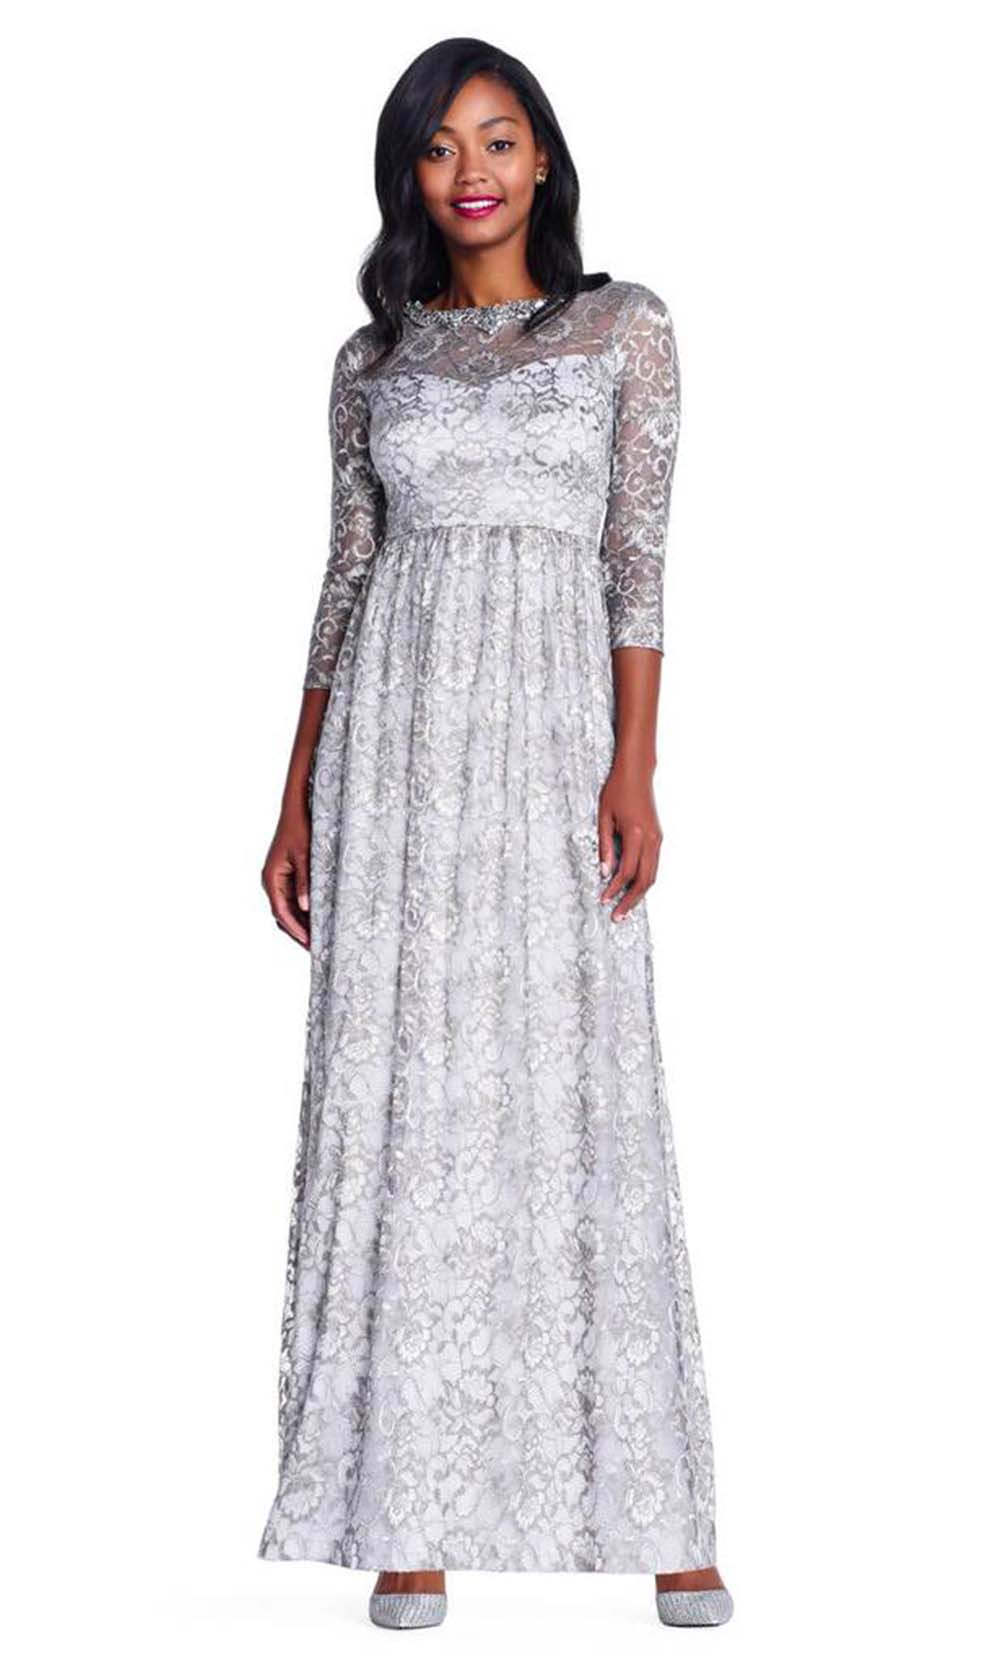 Image of Adrianna Papell - AP1E203486 Lace Evening Dress